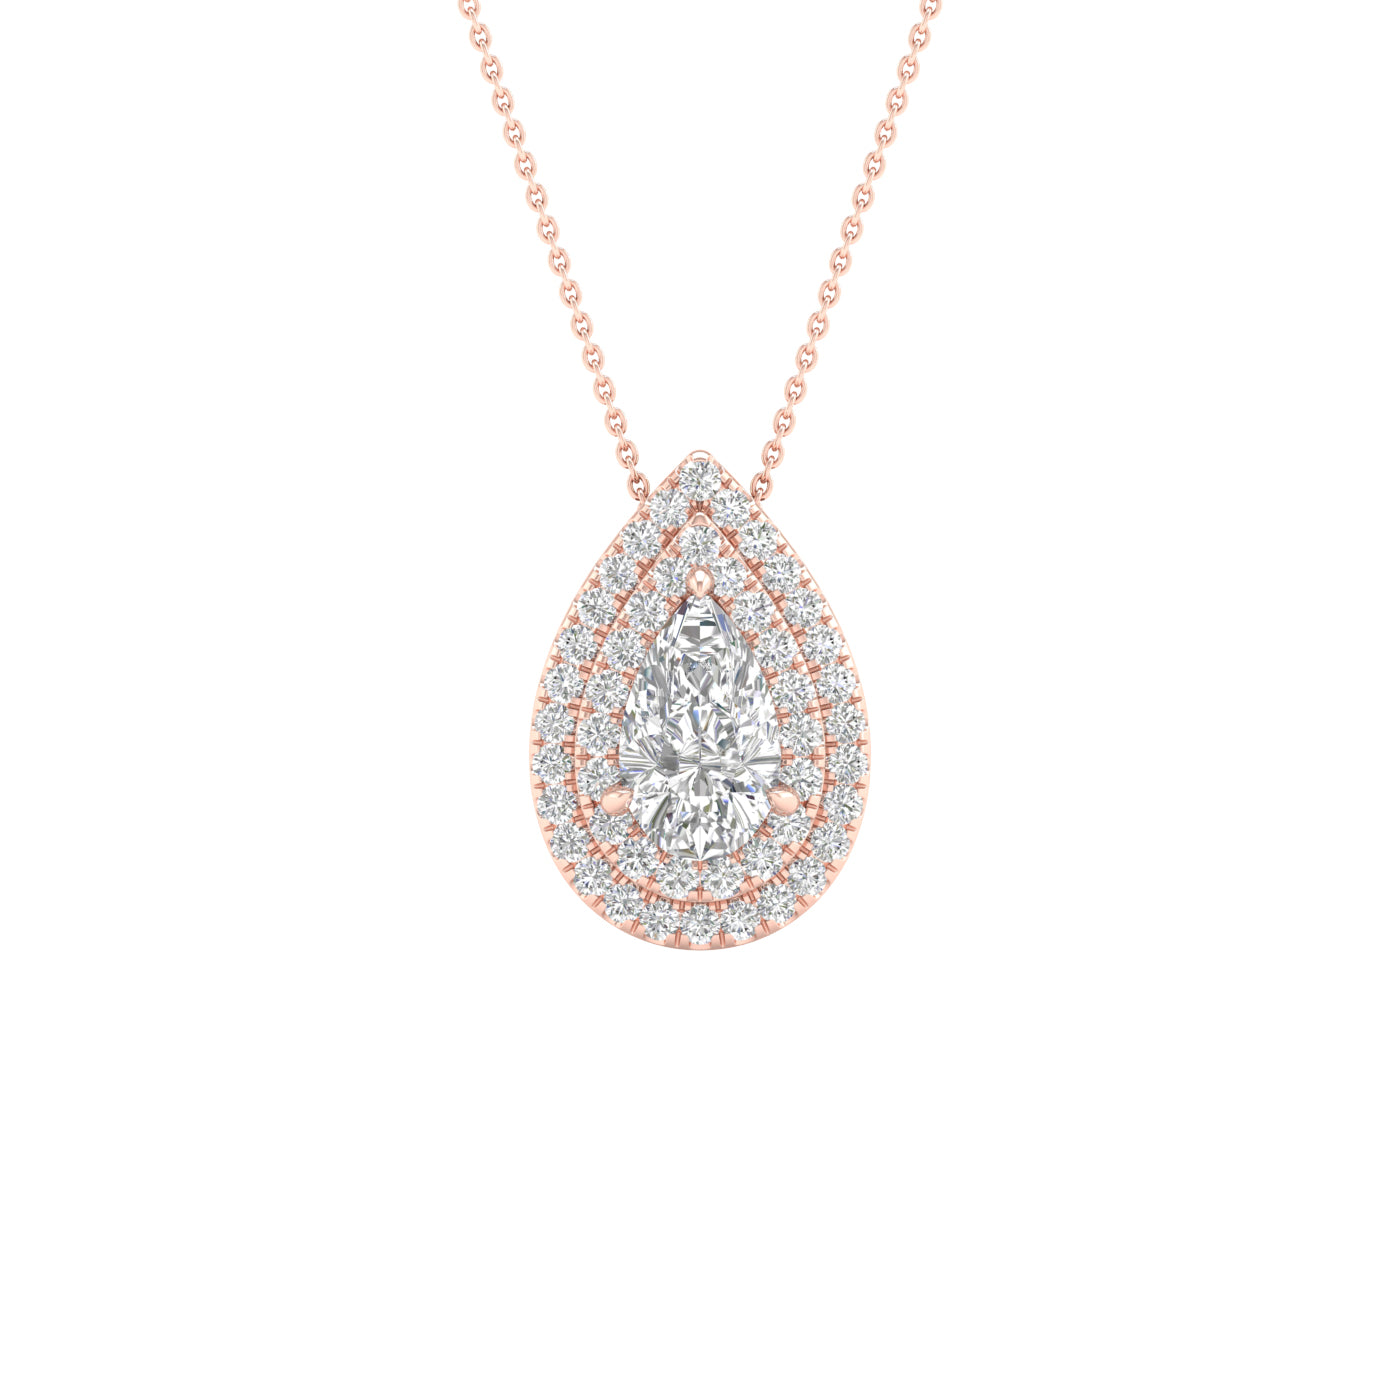 Buy Pear Moissanite Diamond Necklace, Solitaire Necklace, Pear Diamond  Pendant, Layered Necklace, Dainty Necklace, Gold Necklace Bridesmaid Gift  Online in India - Etsy